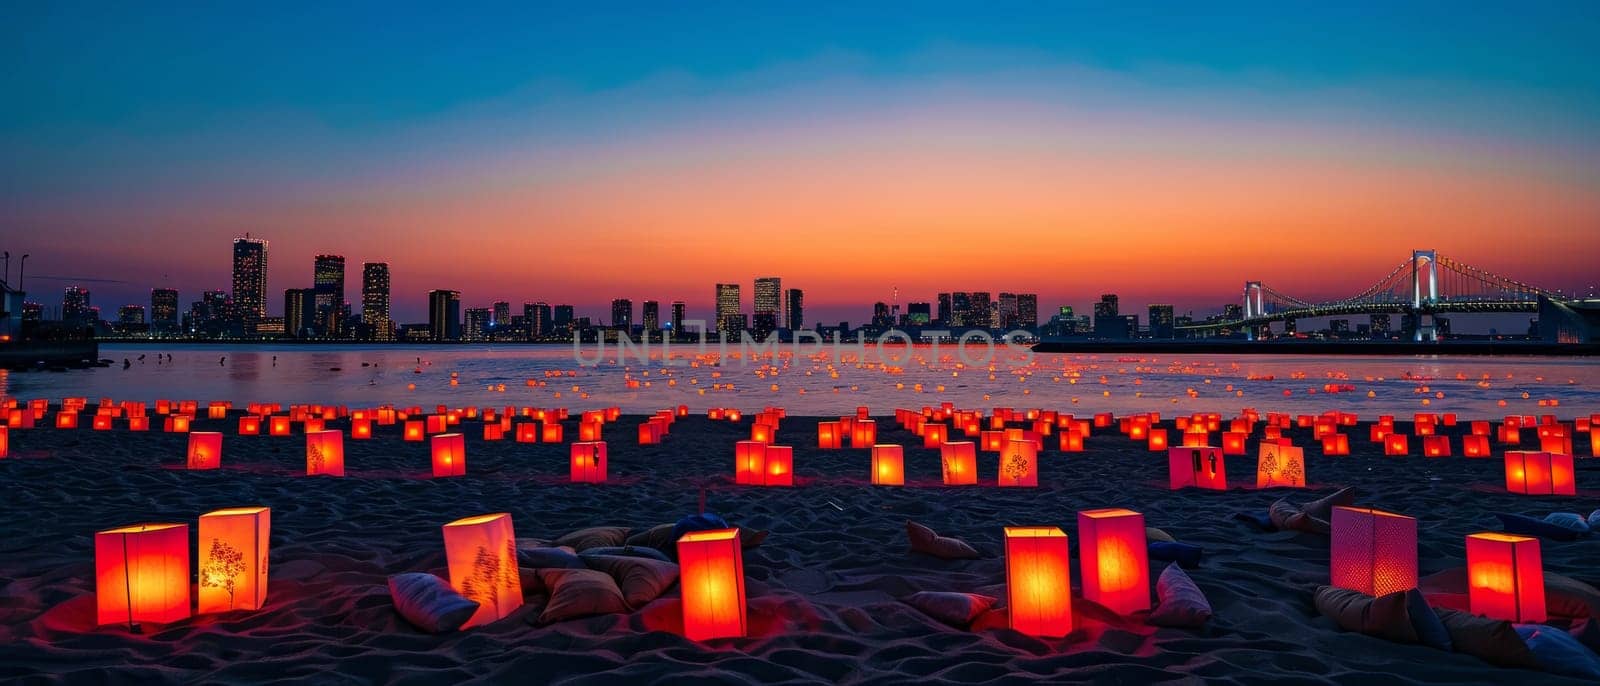 Warm hues of sunset sky blend with the cityscape and illuminated paper lanterns on the beach, commemorating Marine Day with a picturesque seascape. Japanese Umi no Hi known as Ocean Day or Sea Day.